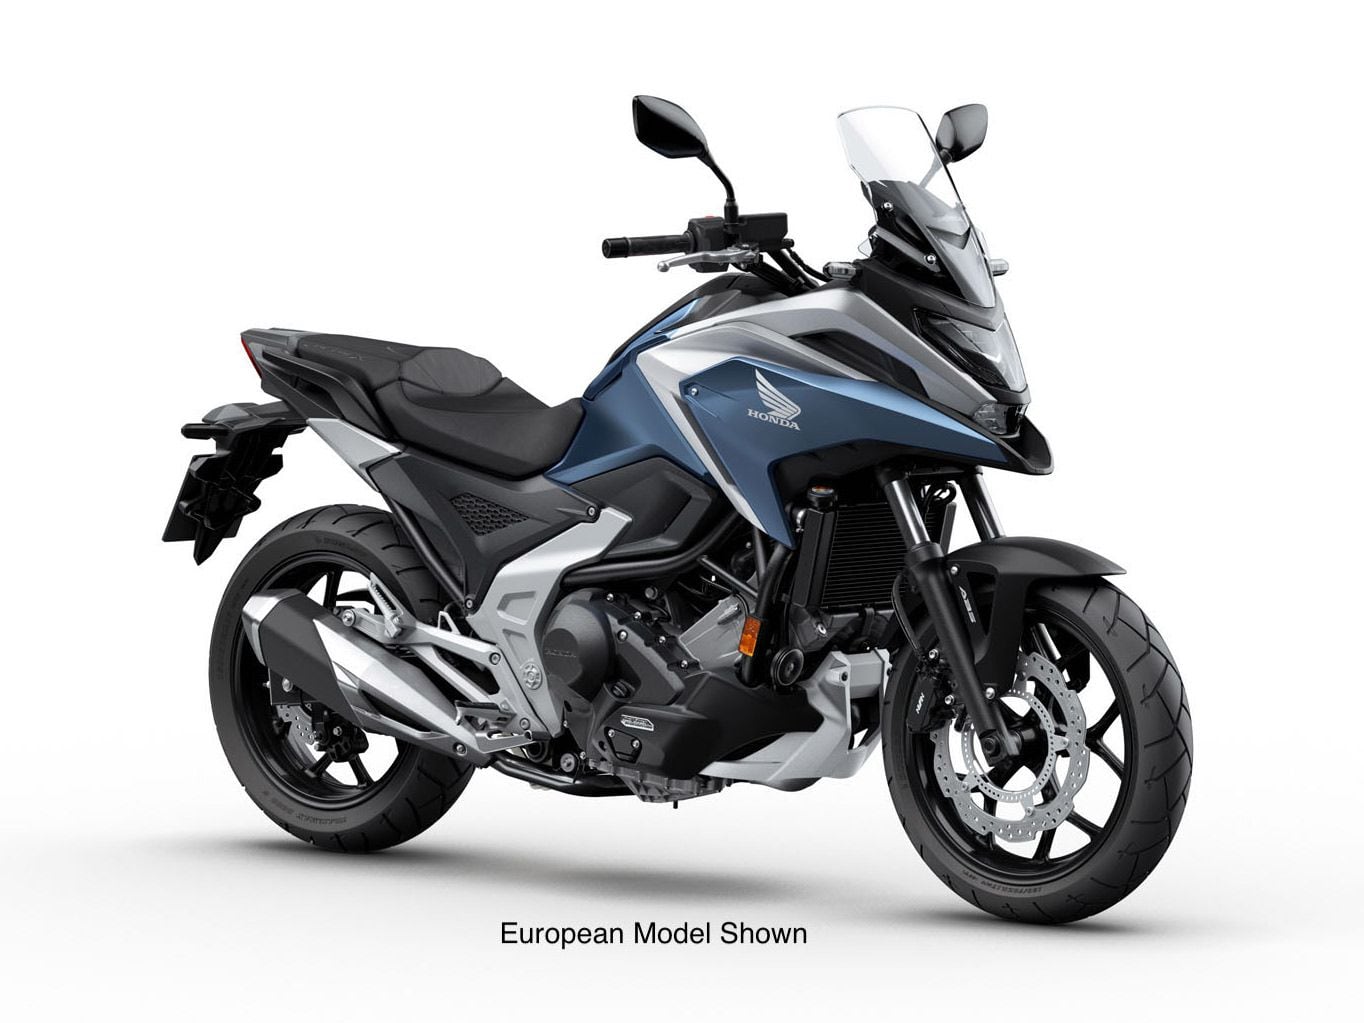 The cost-savings emphasis on efficiency of Honda’s NC750X starts with things like not updating media photography and reusing 2023 European product photography. Well played, Honda.